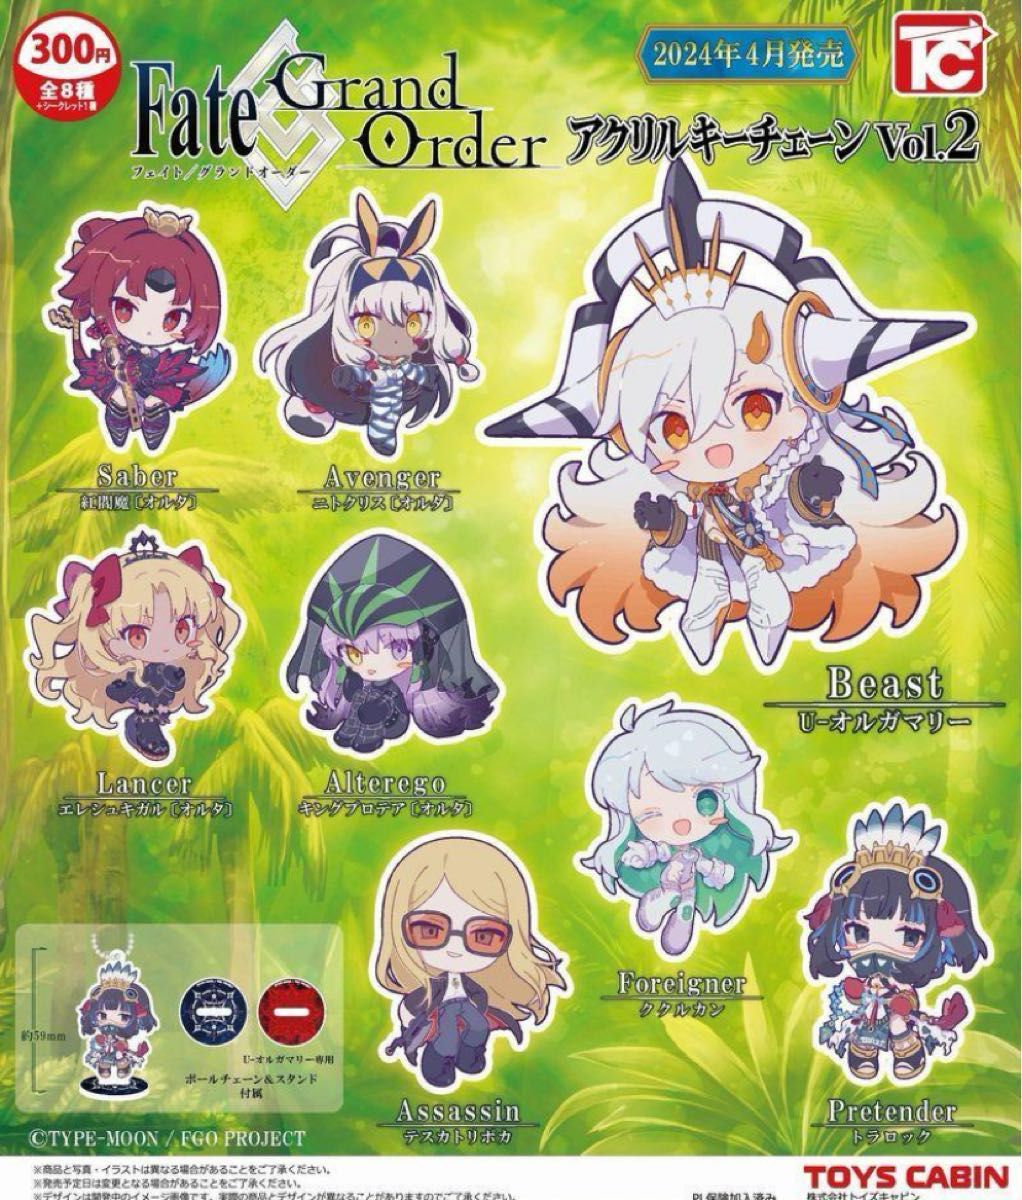 Fate Grand OrderアクリルキーチェーンVol.2全8種セット